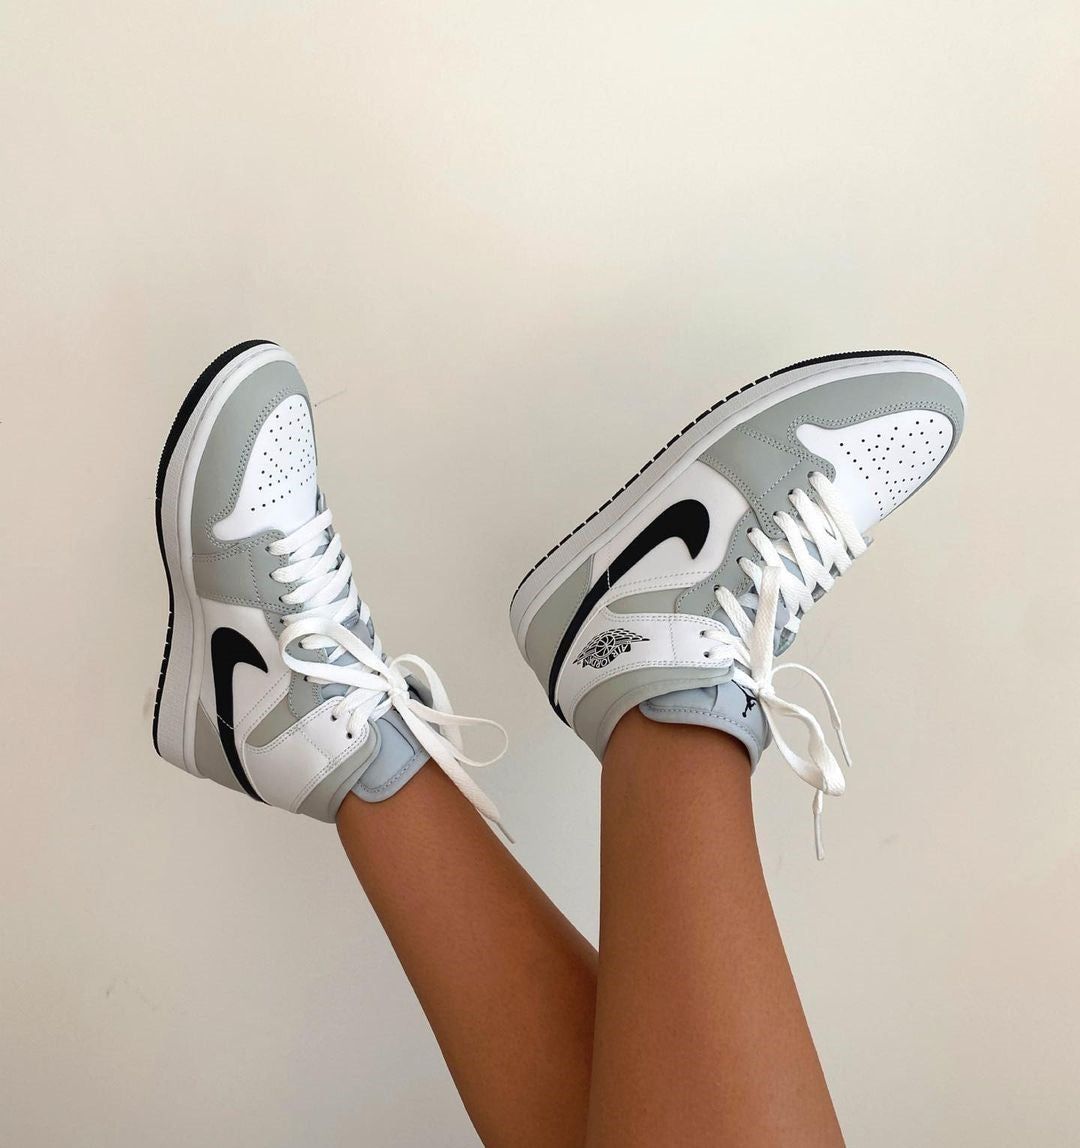 A person wearing white and gray sneakers - Air Jordan 1